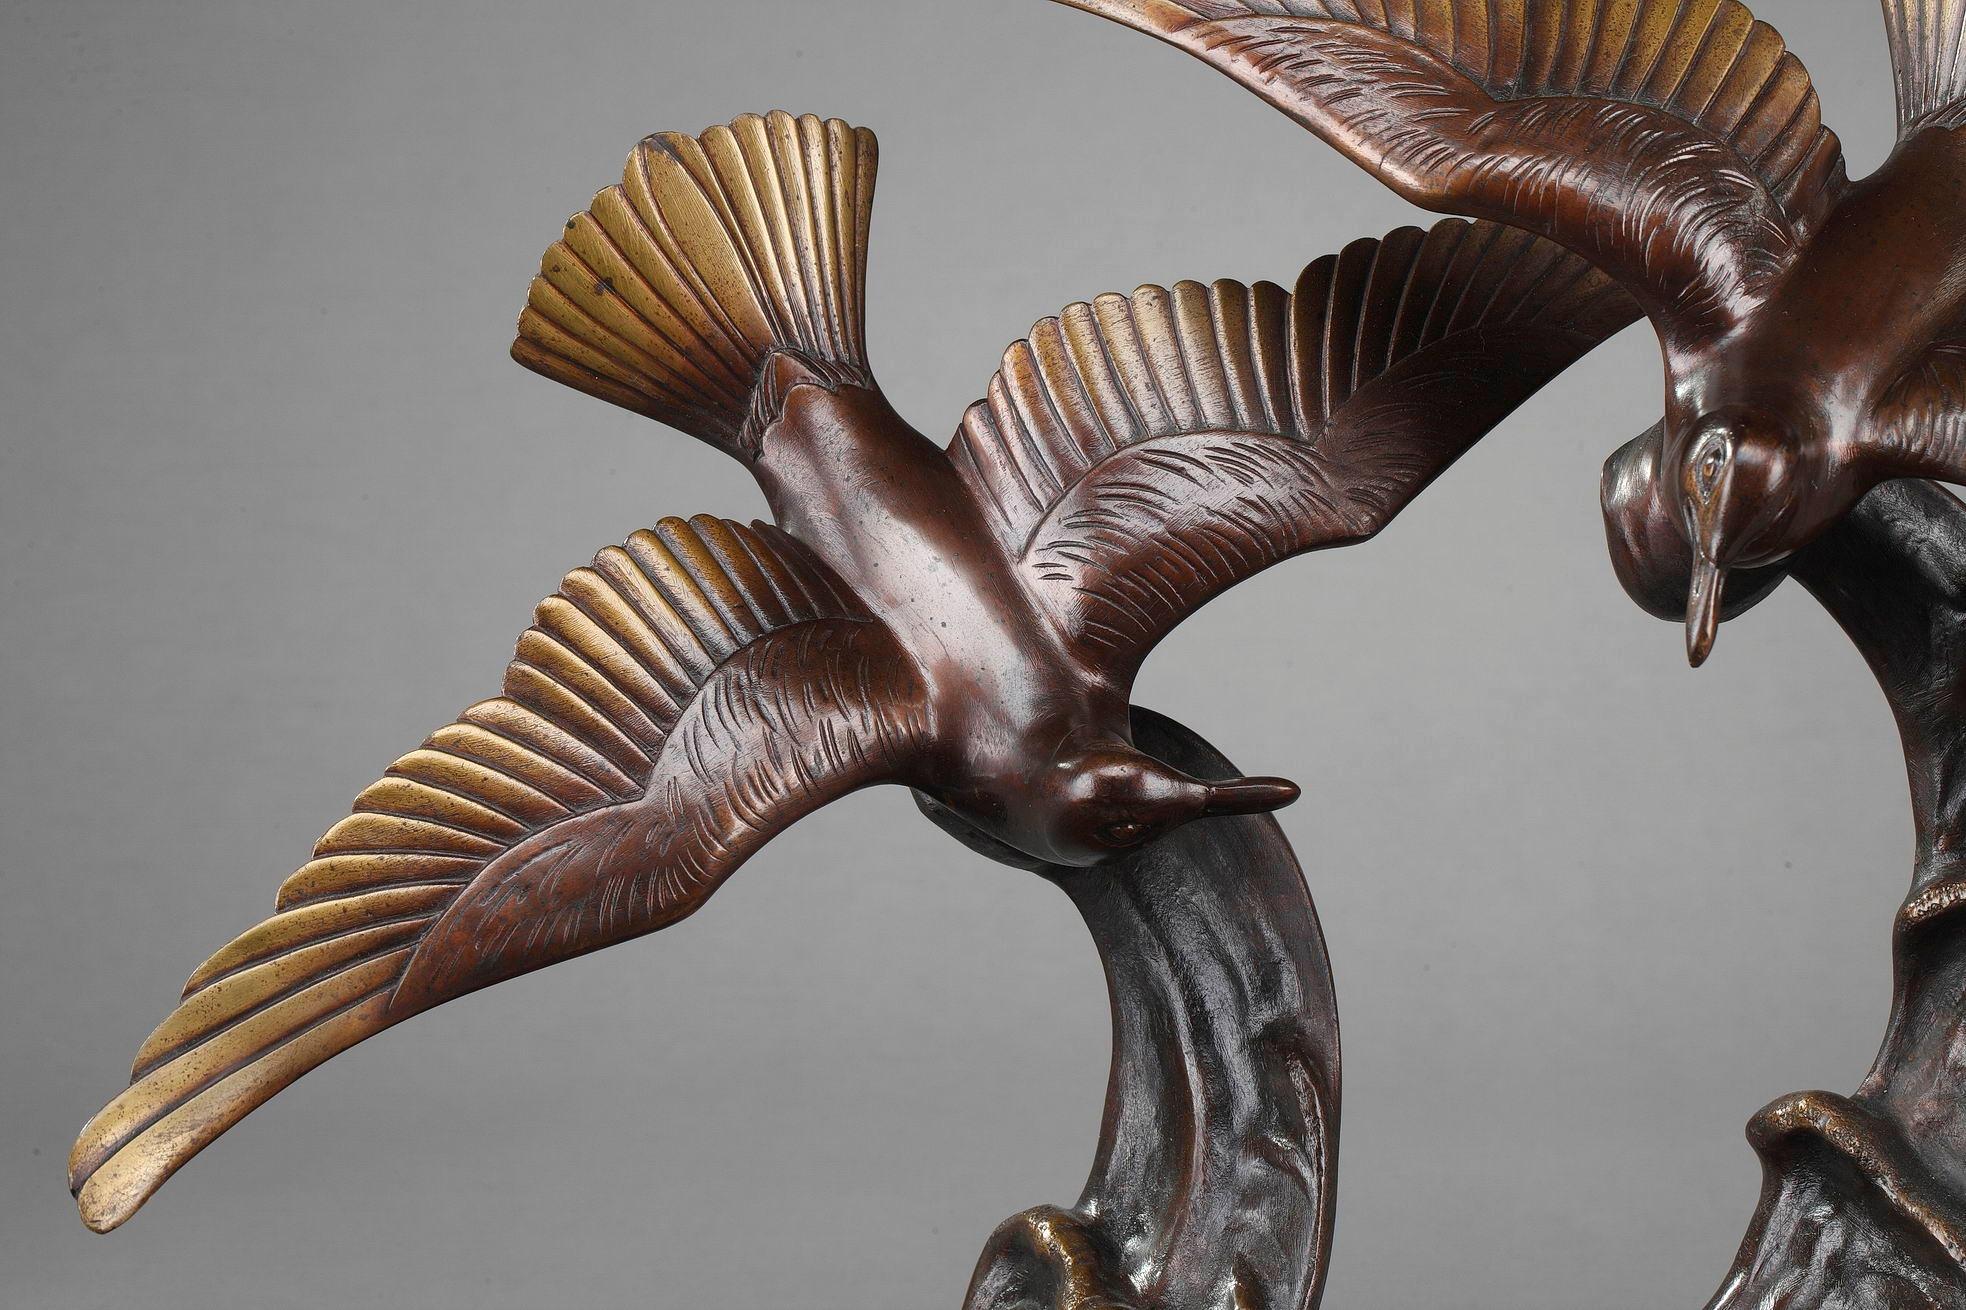 Art Deco-period bronze statue featuring two flying gulls skimming the crest of a wave. The sculpture is set upon a black marble base. Signed H. Molins for Enrique Molins Balleste (1893-1958), a Spanish sculptor born in Barcelona, working in Paris in